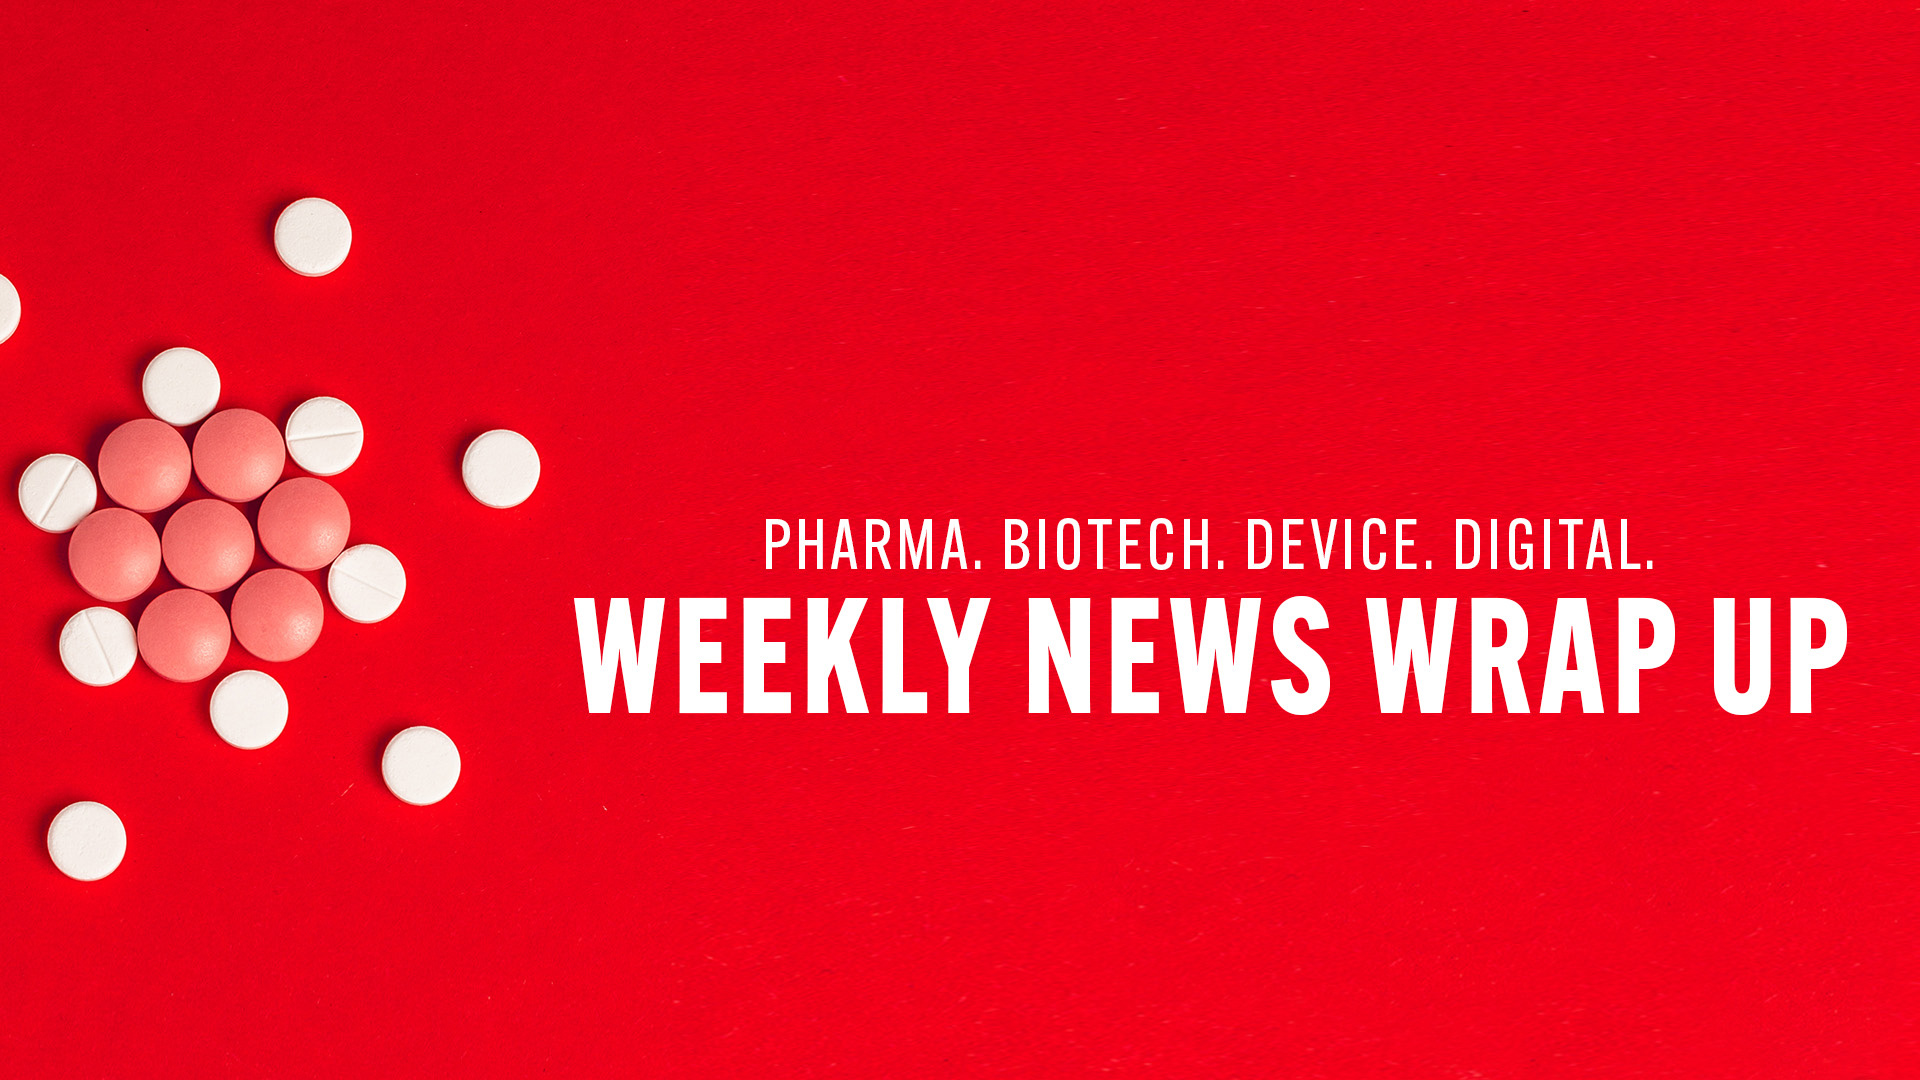 Healthcare Industry News Weekly Wrap-Up: September 3, 2022